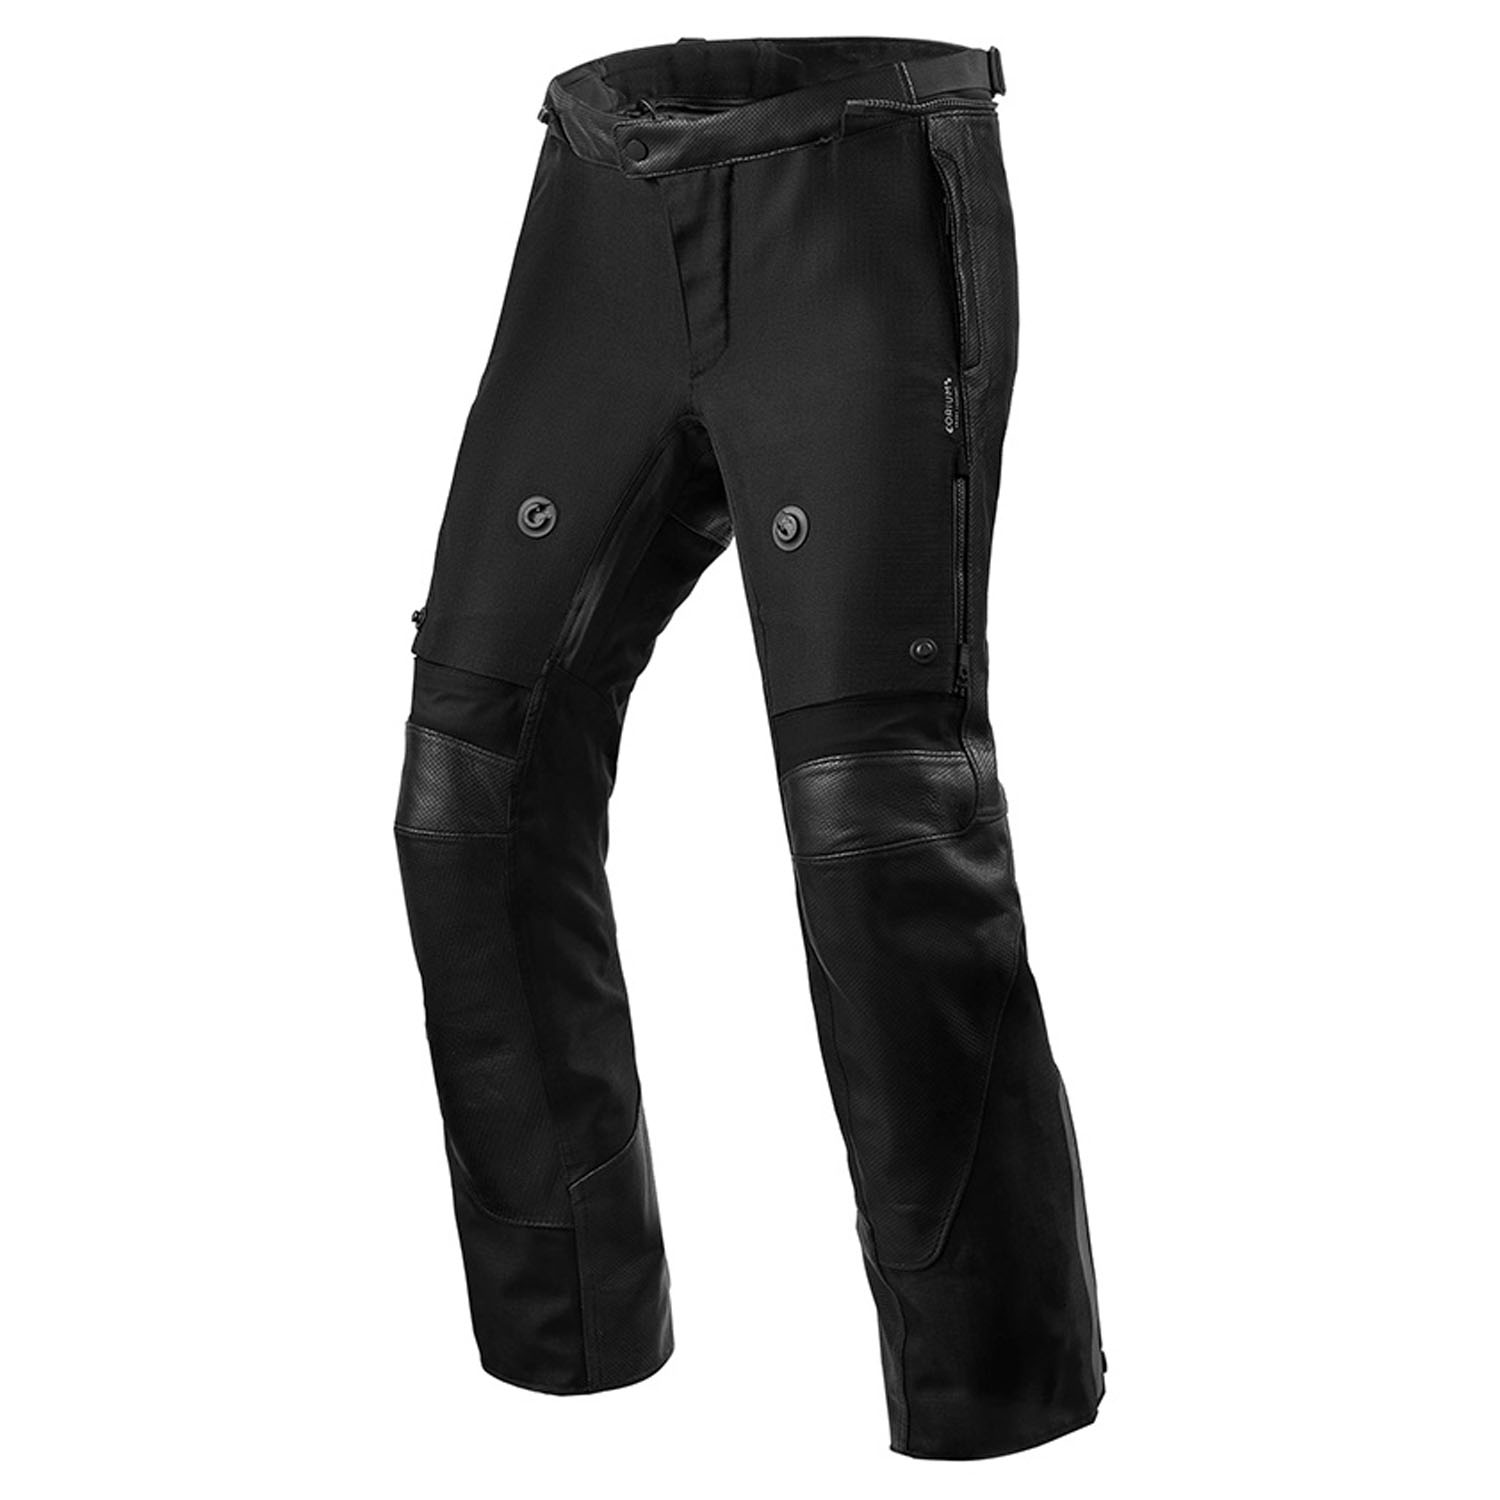 Image of EU REV'IT! Trousers Valve H2O Black Short Motorcycle Pants Taille 54